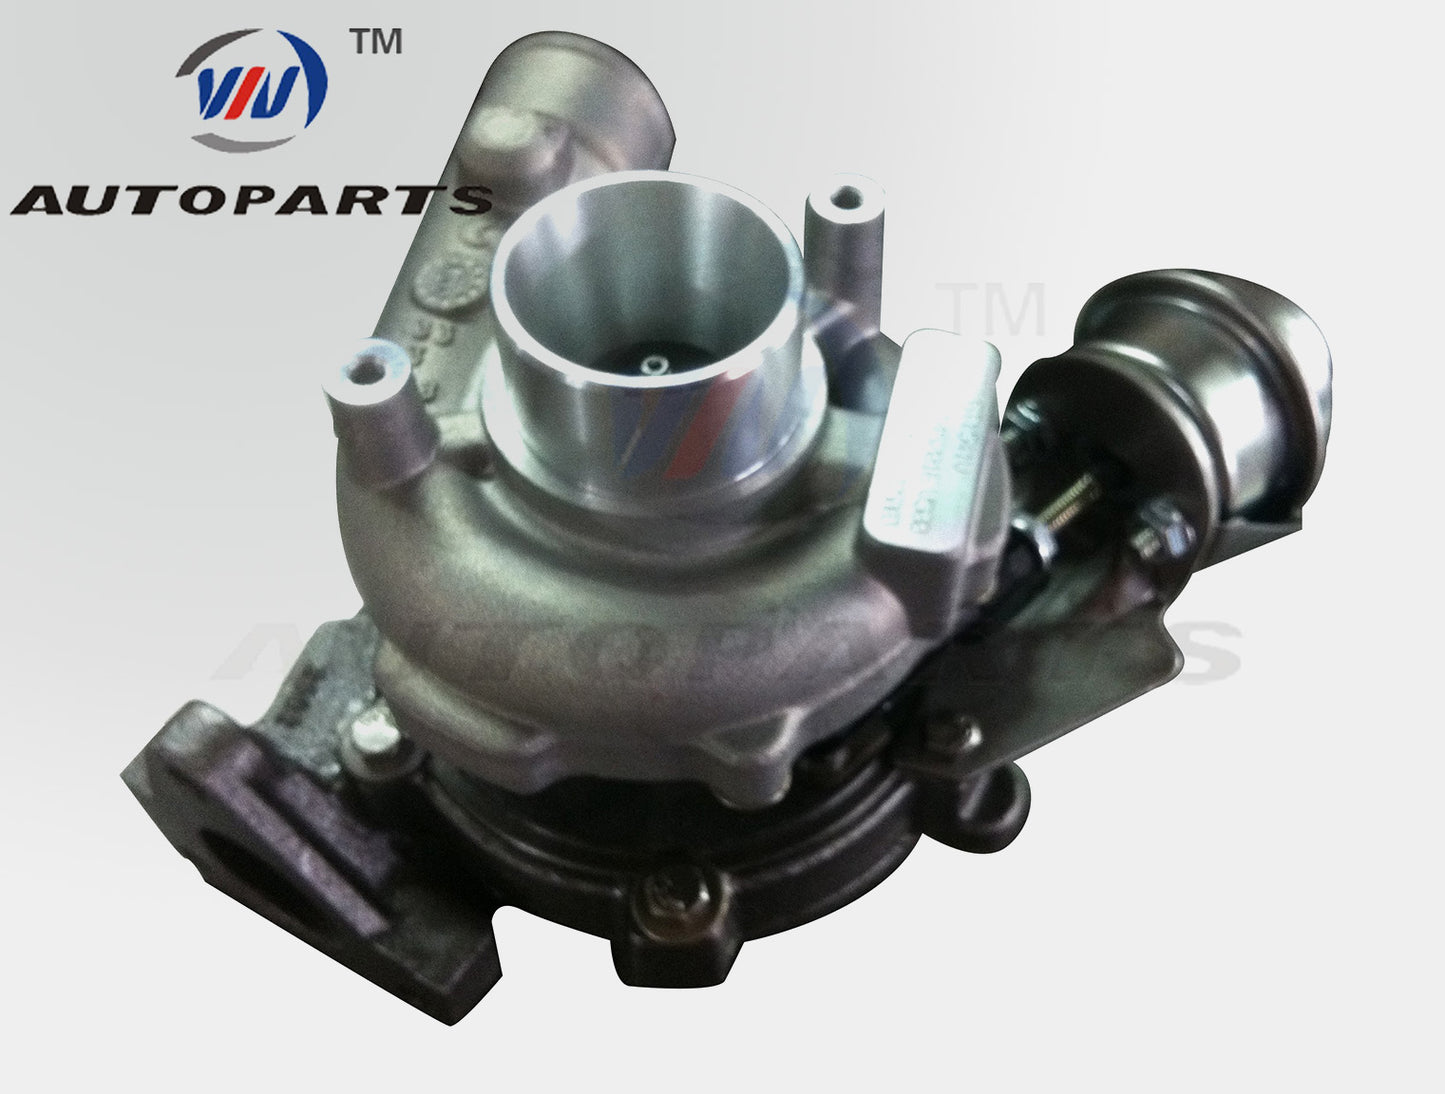 Turbocharger 700960-5012S for Audi Seat VW varies with 1.2L Diesel Engine